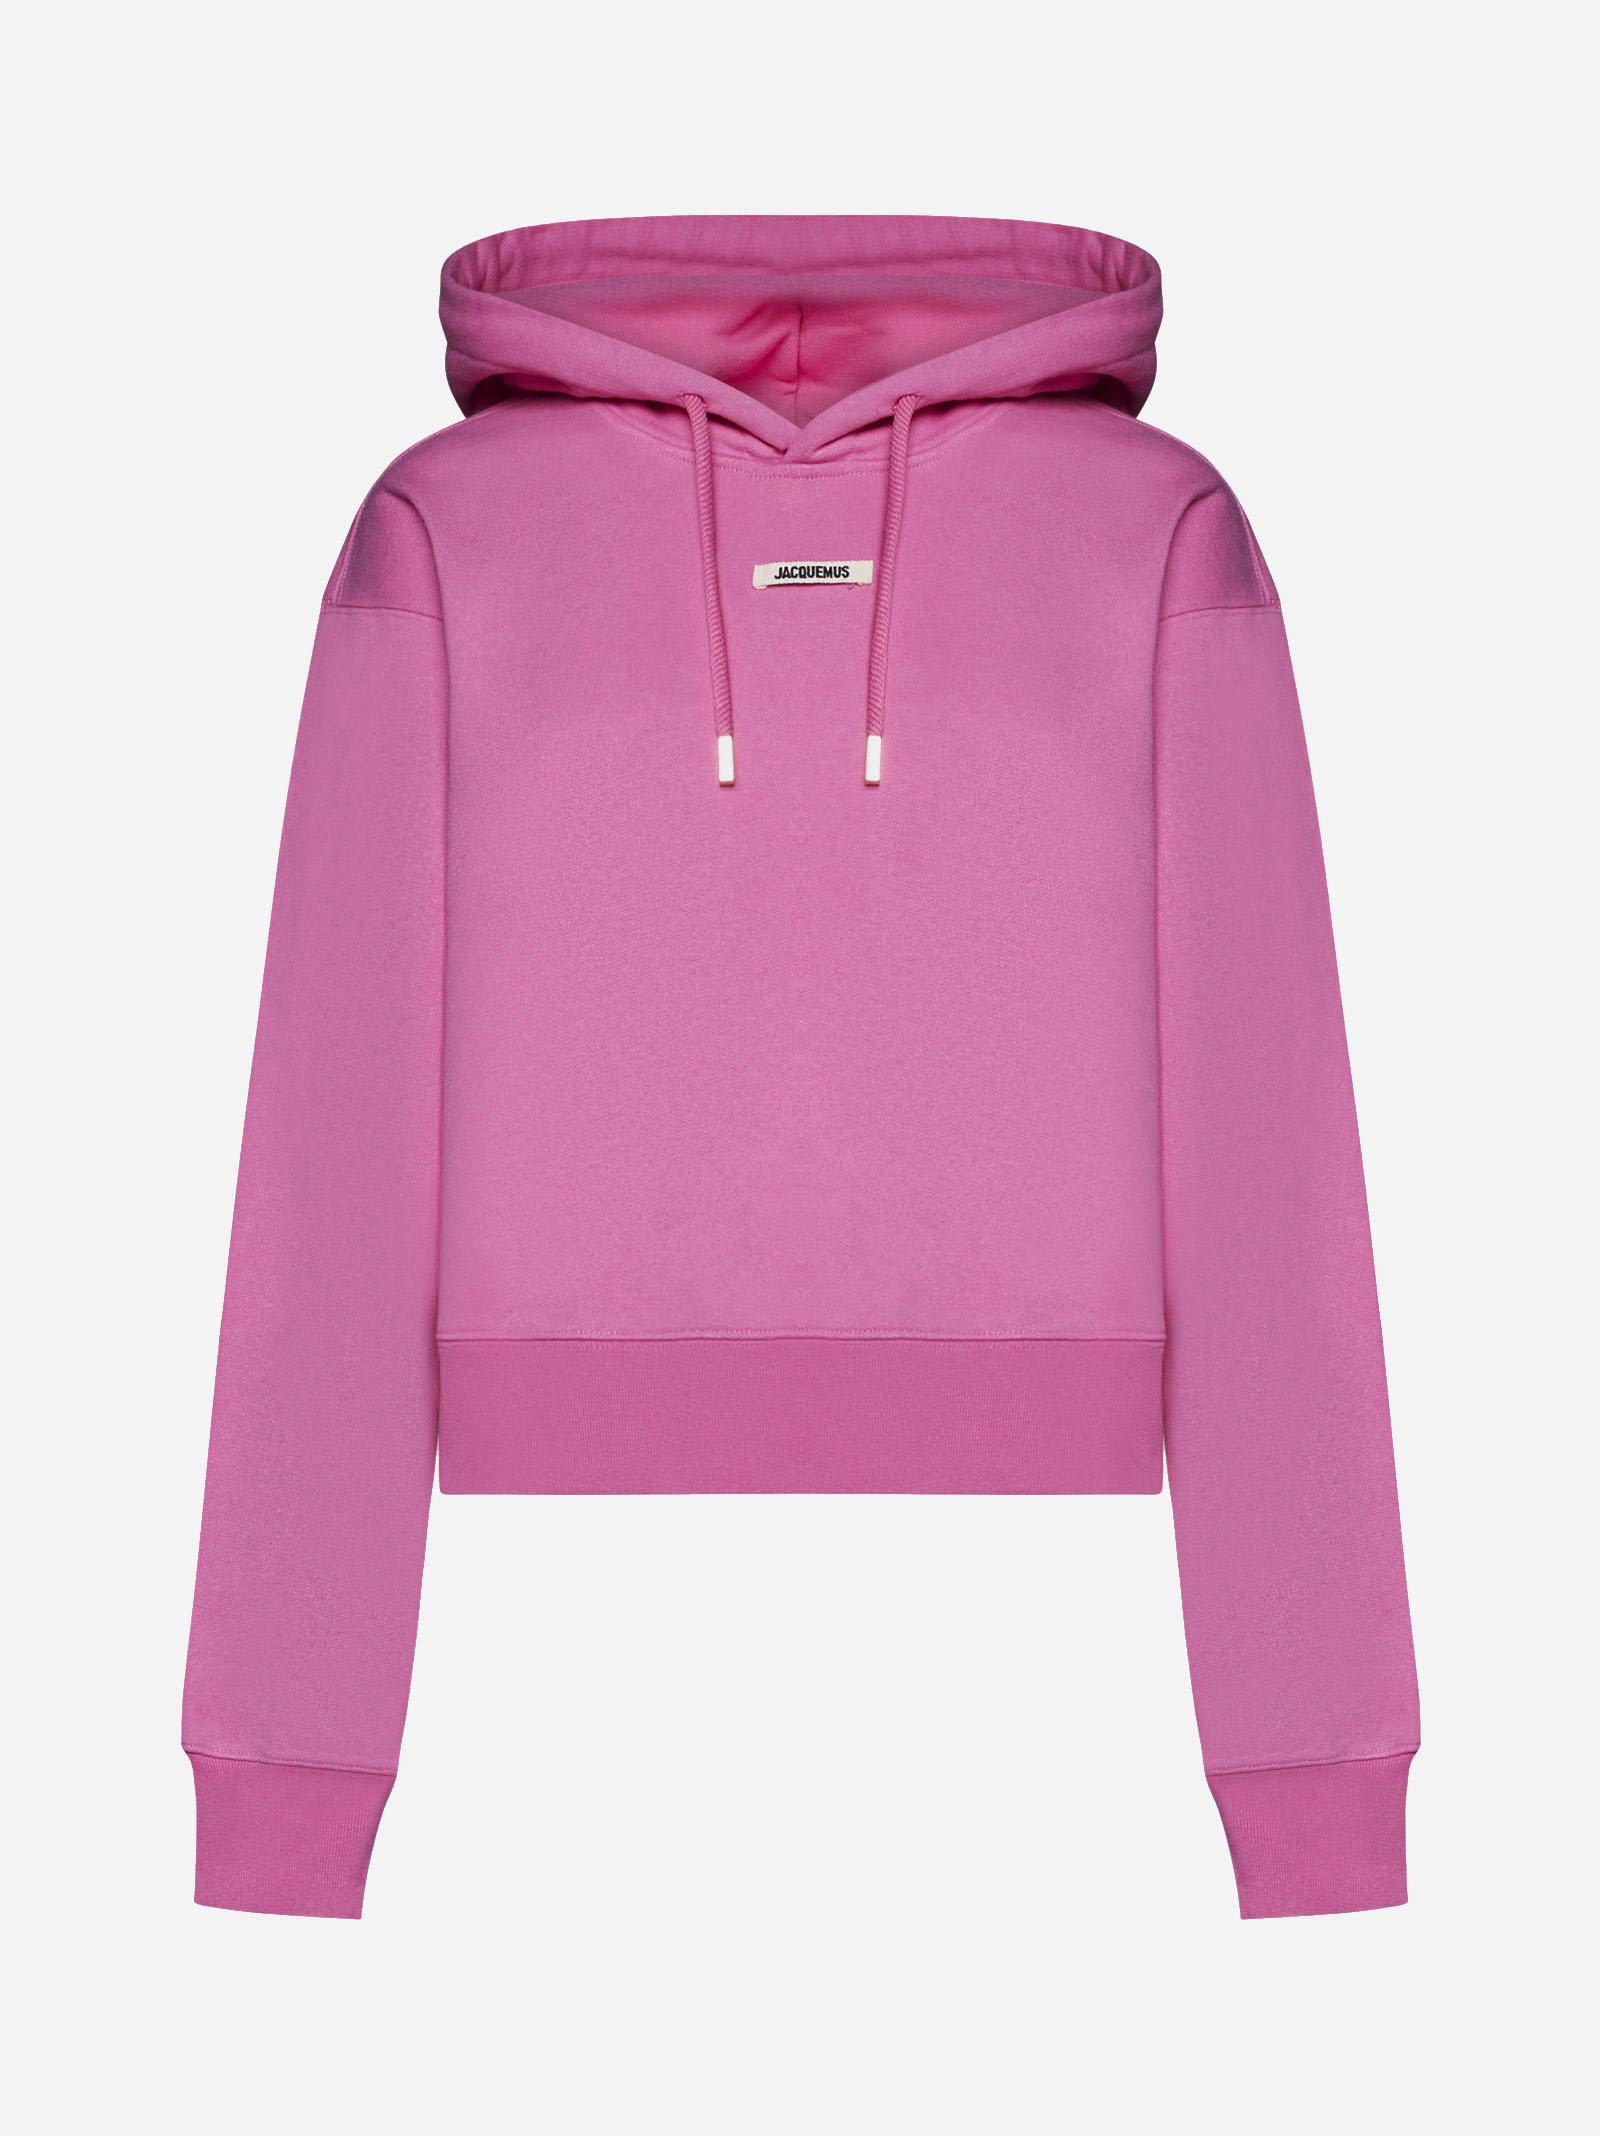 Jacquemus Gros Grain Cotton Hoodie In Pink